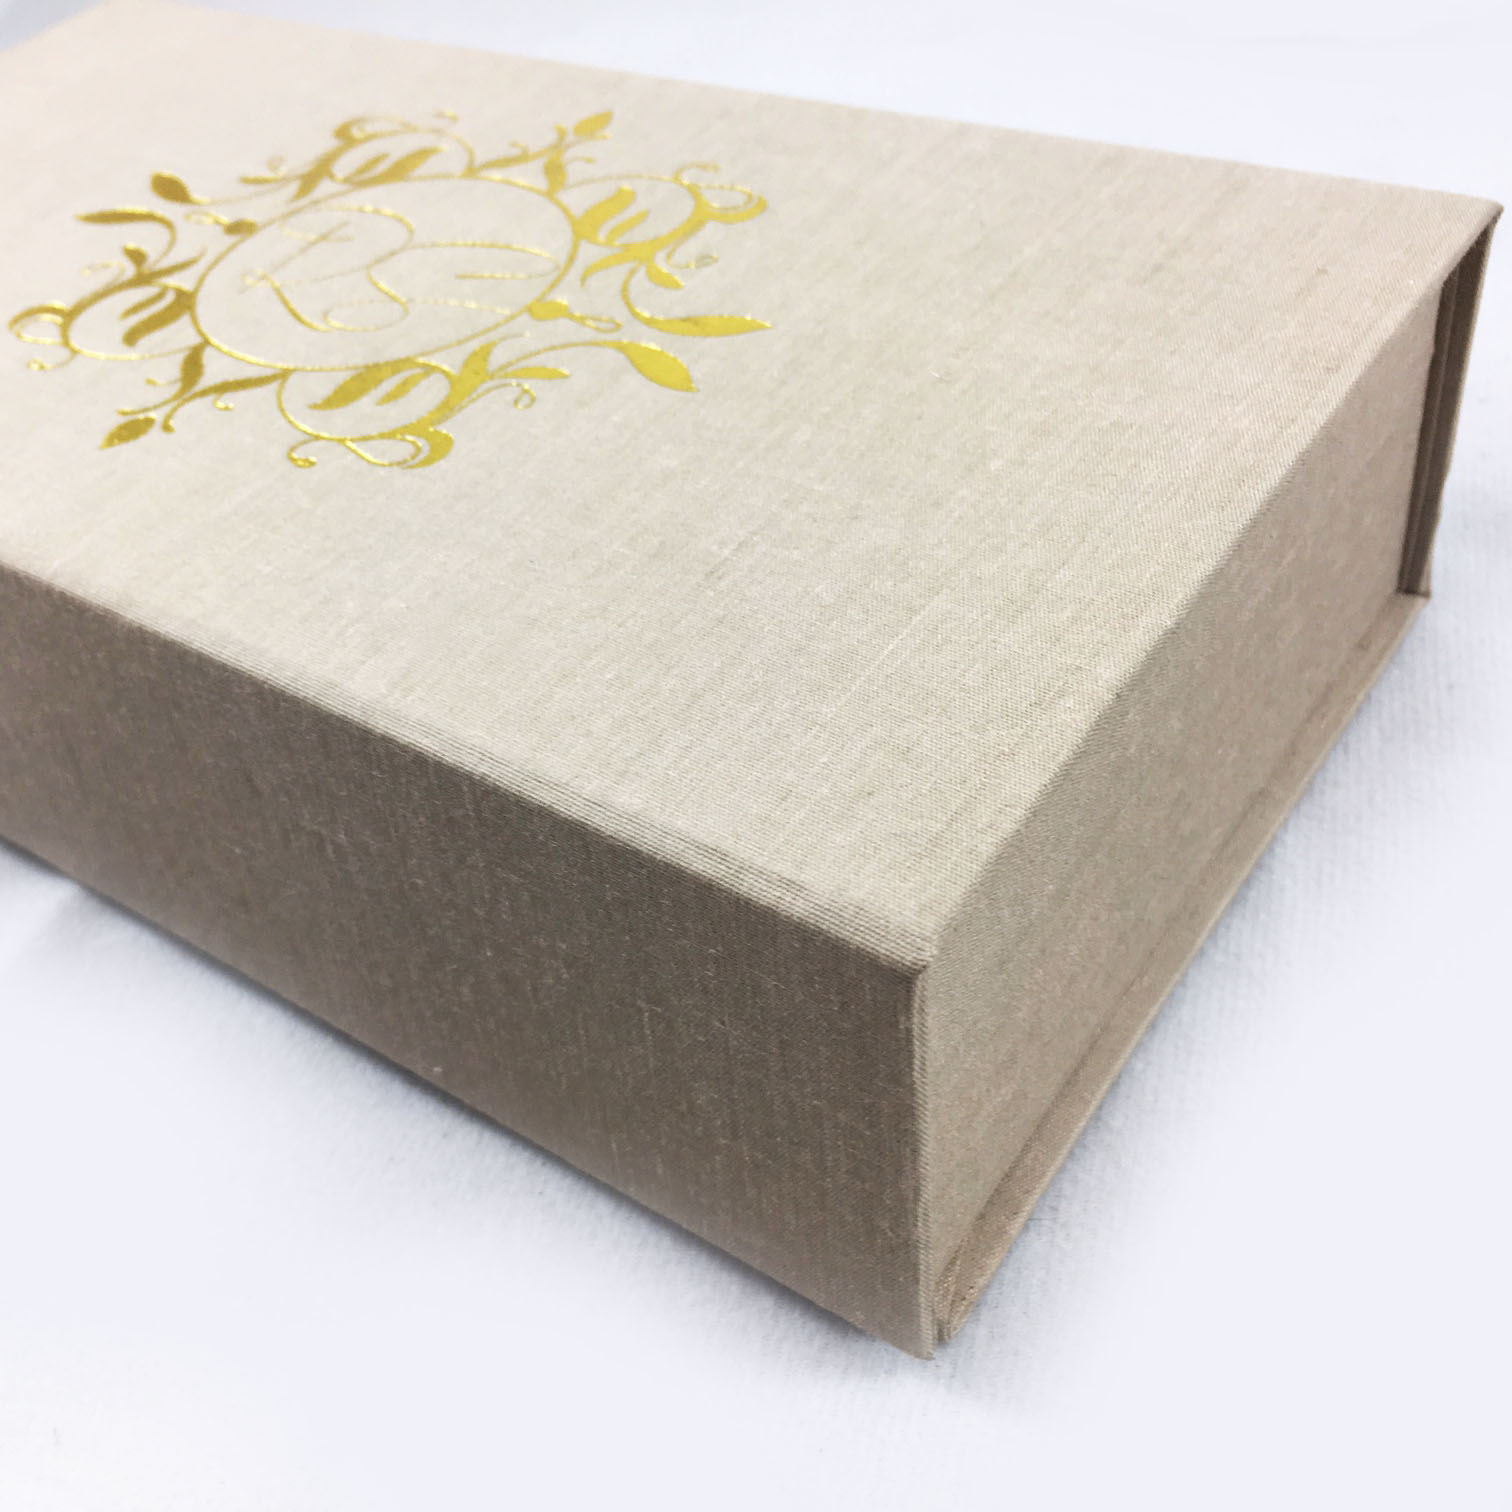 Linen USB Box & Jewelry Box Design That Can Be Foil Stamped With Logo